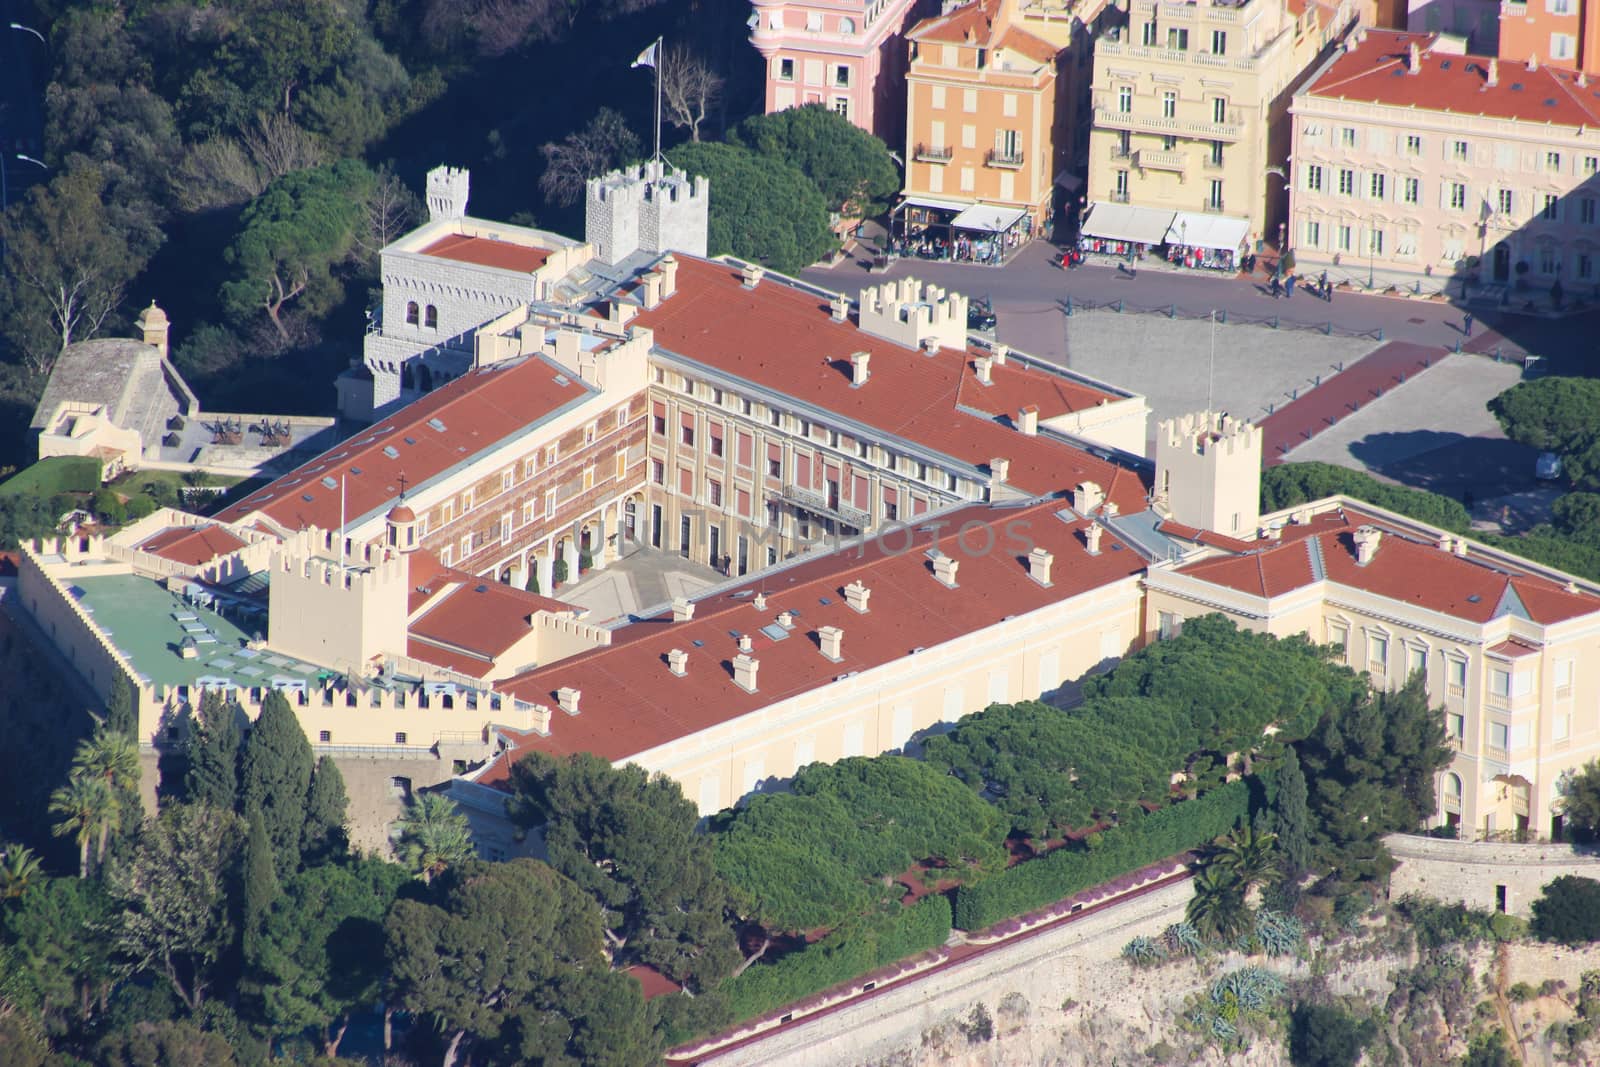 Monaco-Ville, Monaco - March 18, 2016: Aerial view of the Prince's Palace (Palais du Prince) on The Rock, south of France 